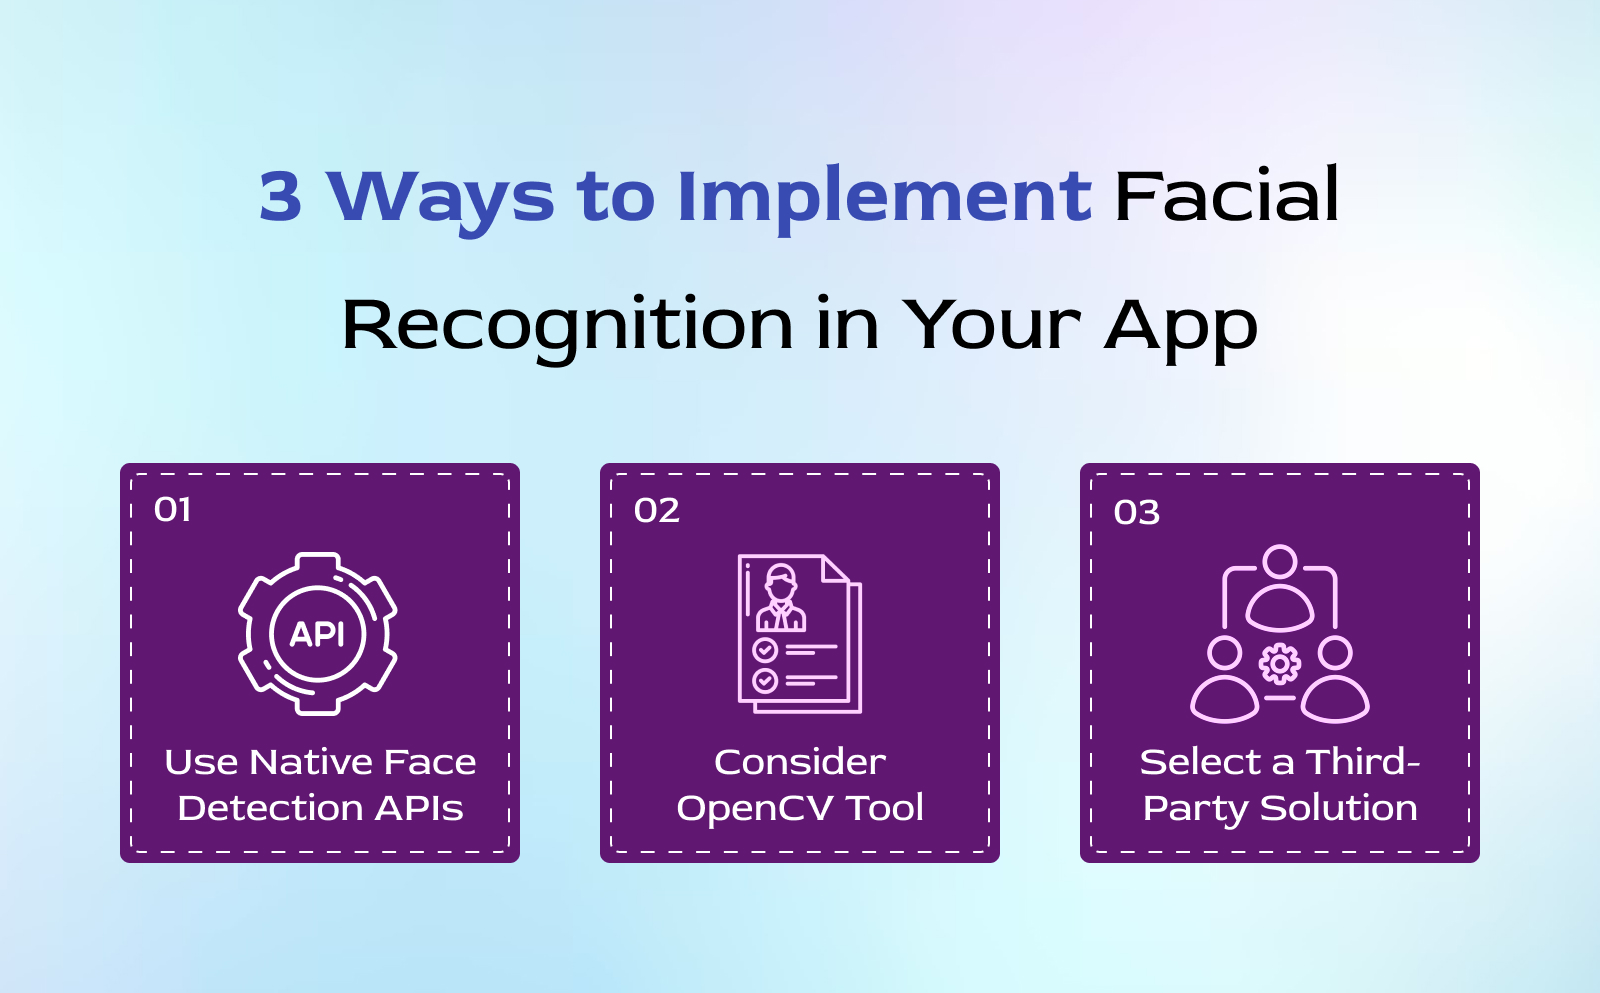 3 Ways to Implement Facial Recognition in Your App